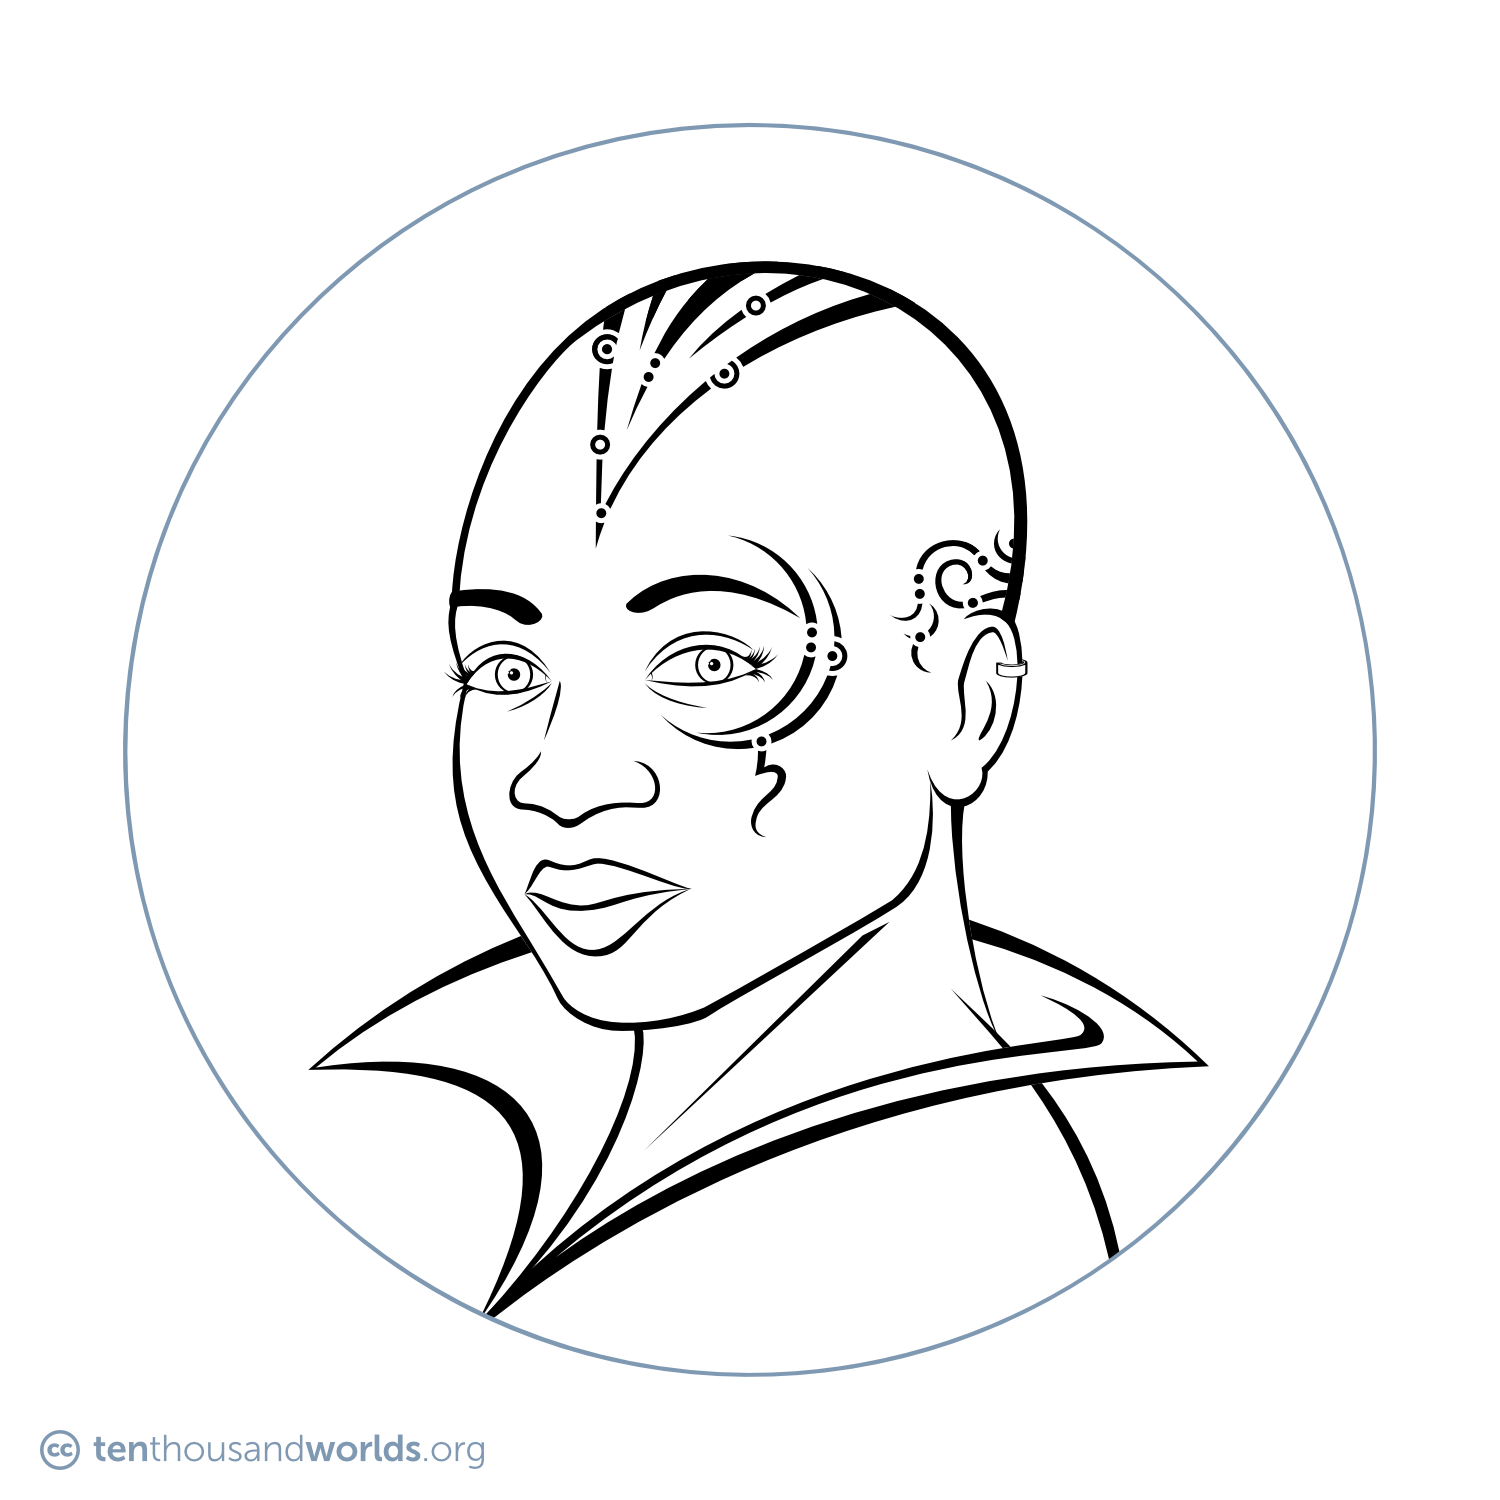 An ink outline of a woman sporting several abstract, geometric tattoos on her shaved head. They are comprised of lines, arcs, dots, and circles. Some curl over her left ear from the back of her hear, others orbit her left eye, and many form a wedge at the top of her skull that points down between her eyes.